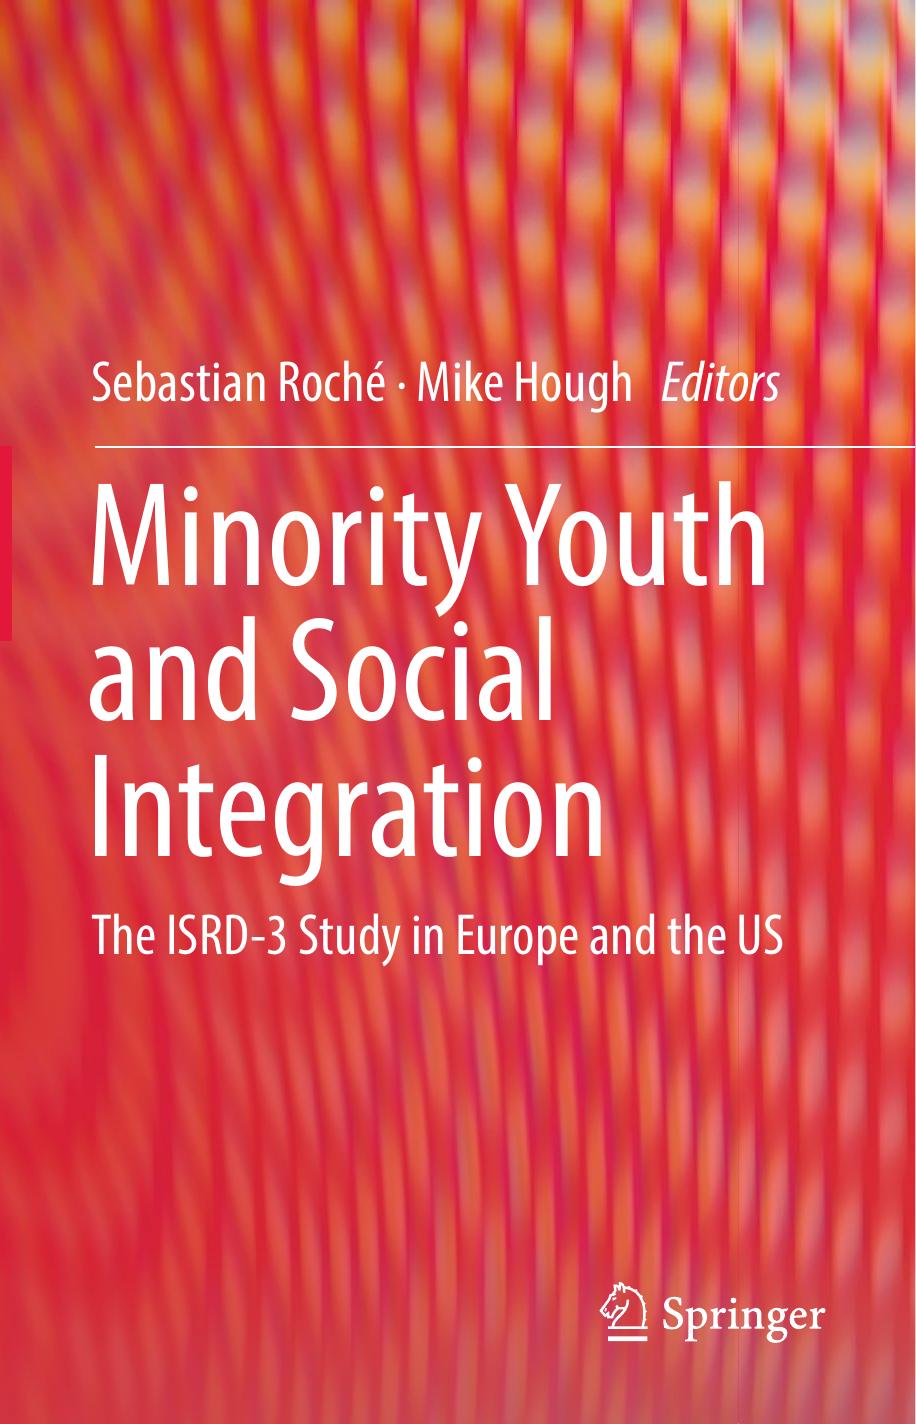 29 Minority Youth and Social Integration 2018